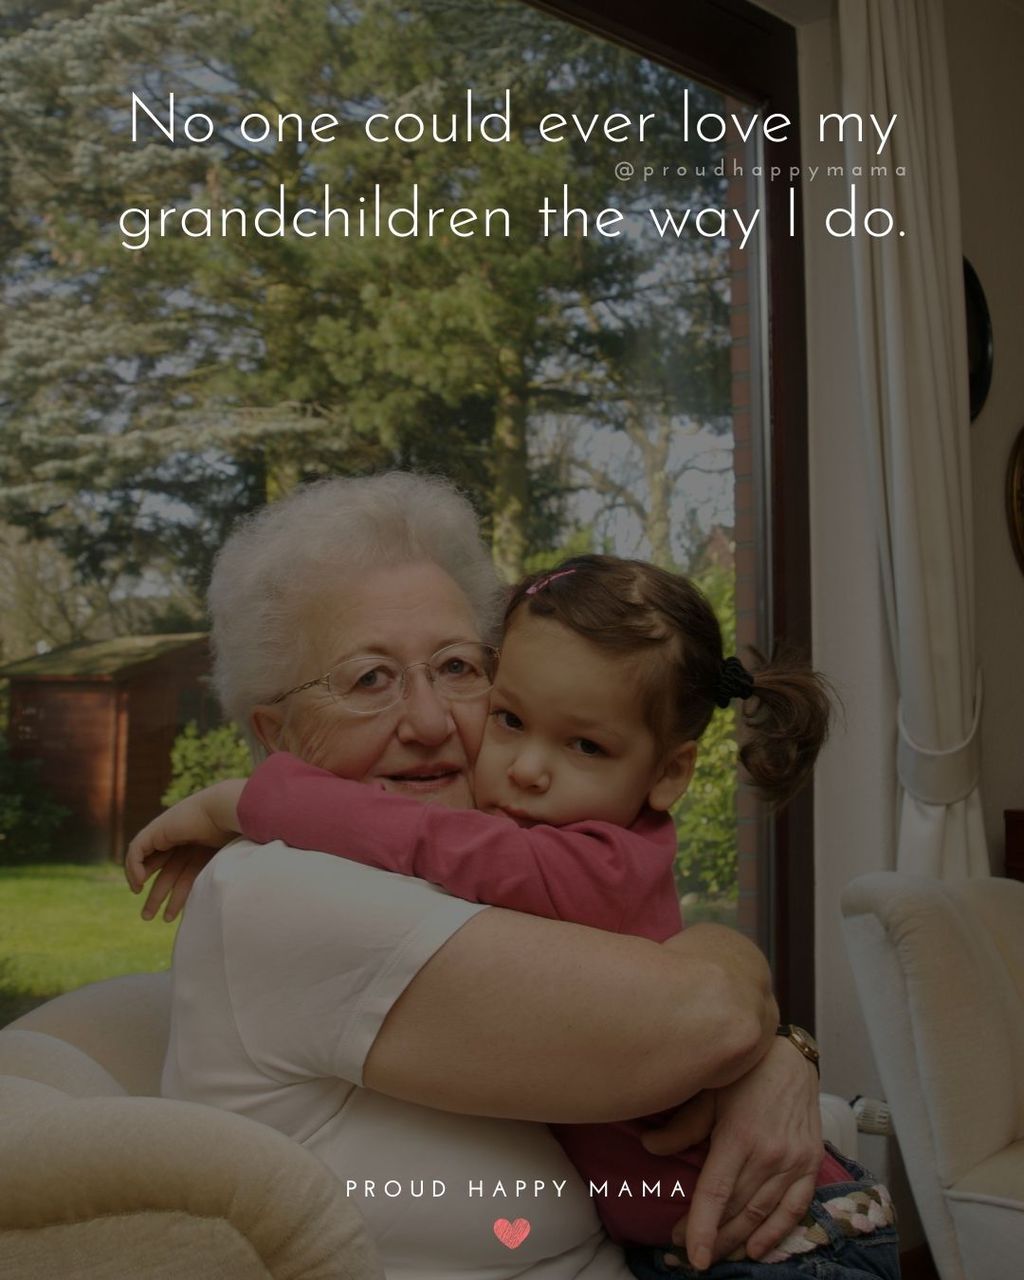 Quotes for Grandchildren - No one could ever love my grandchildren the way I do.